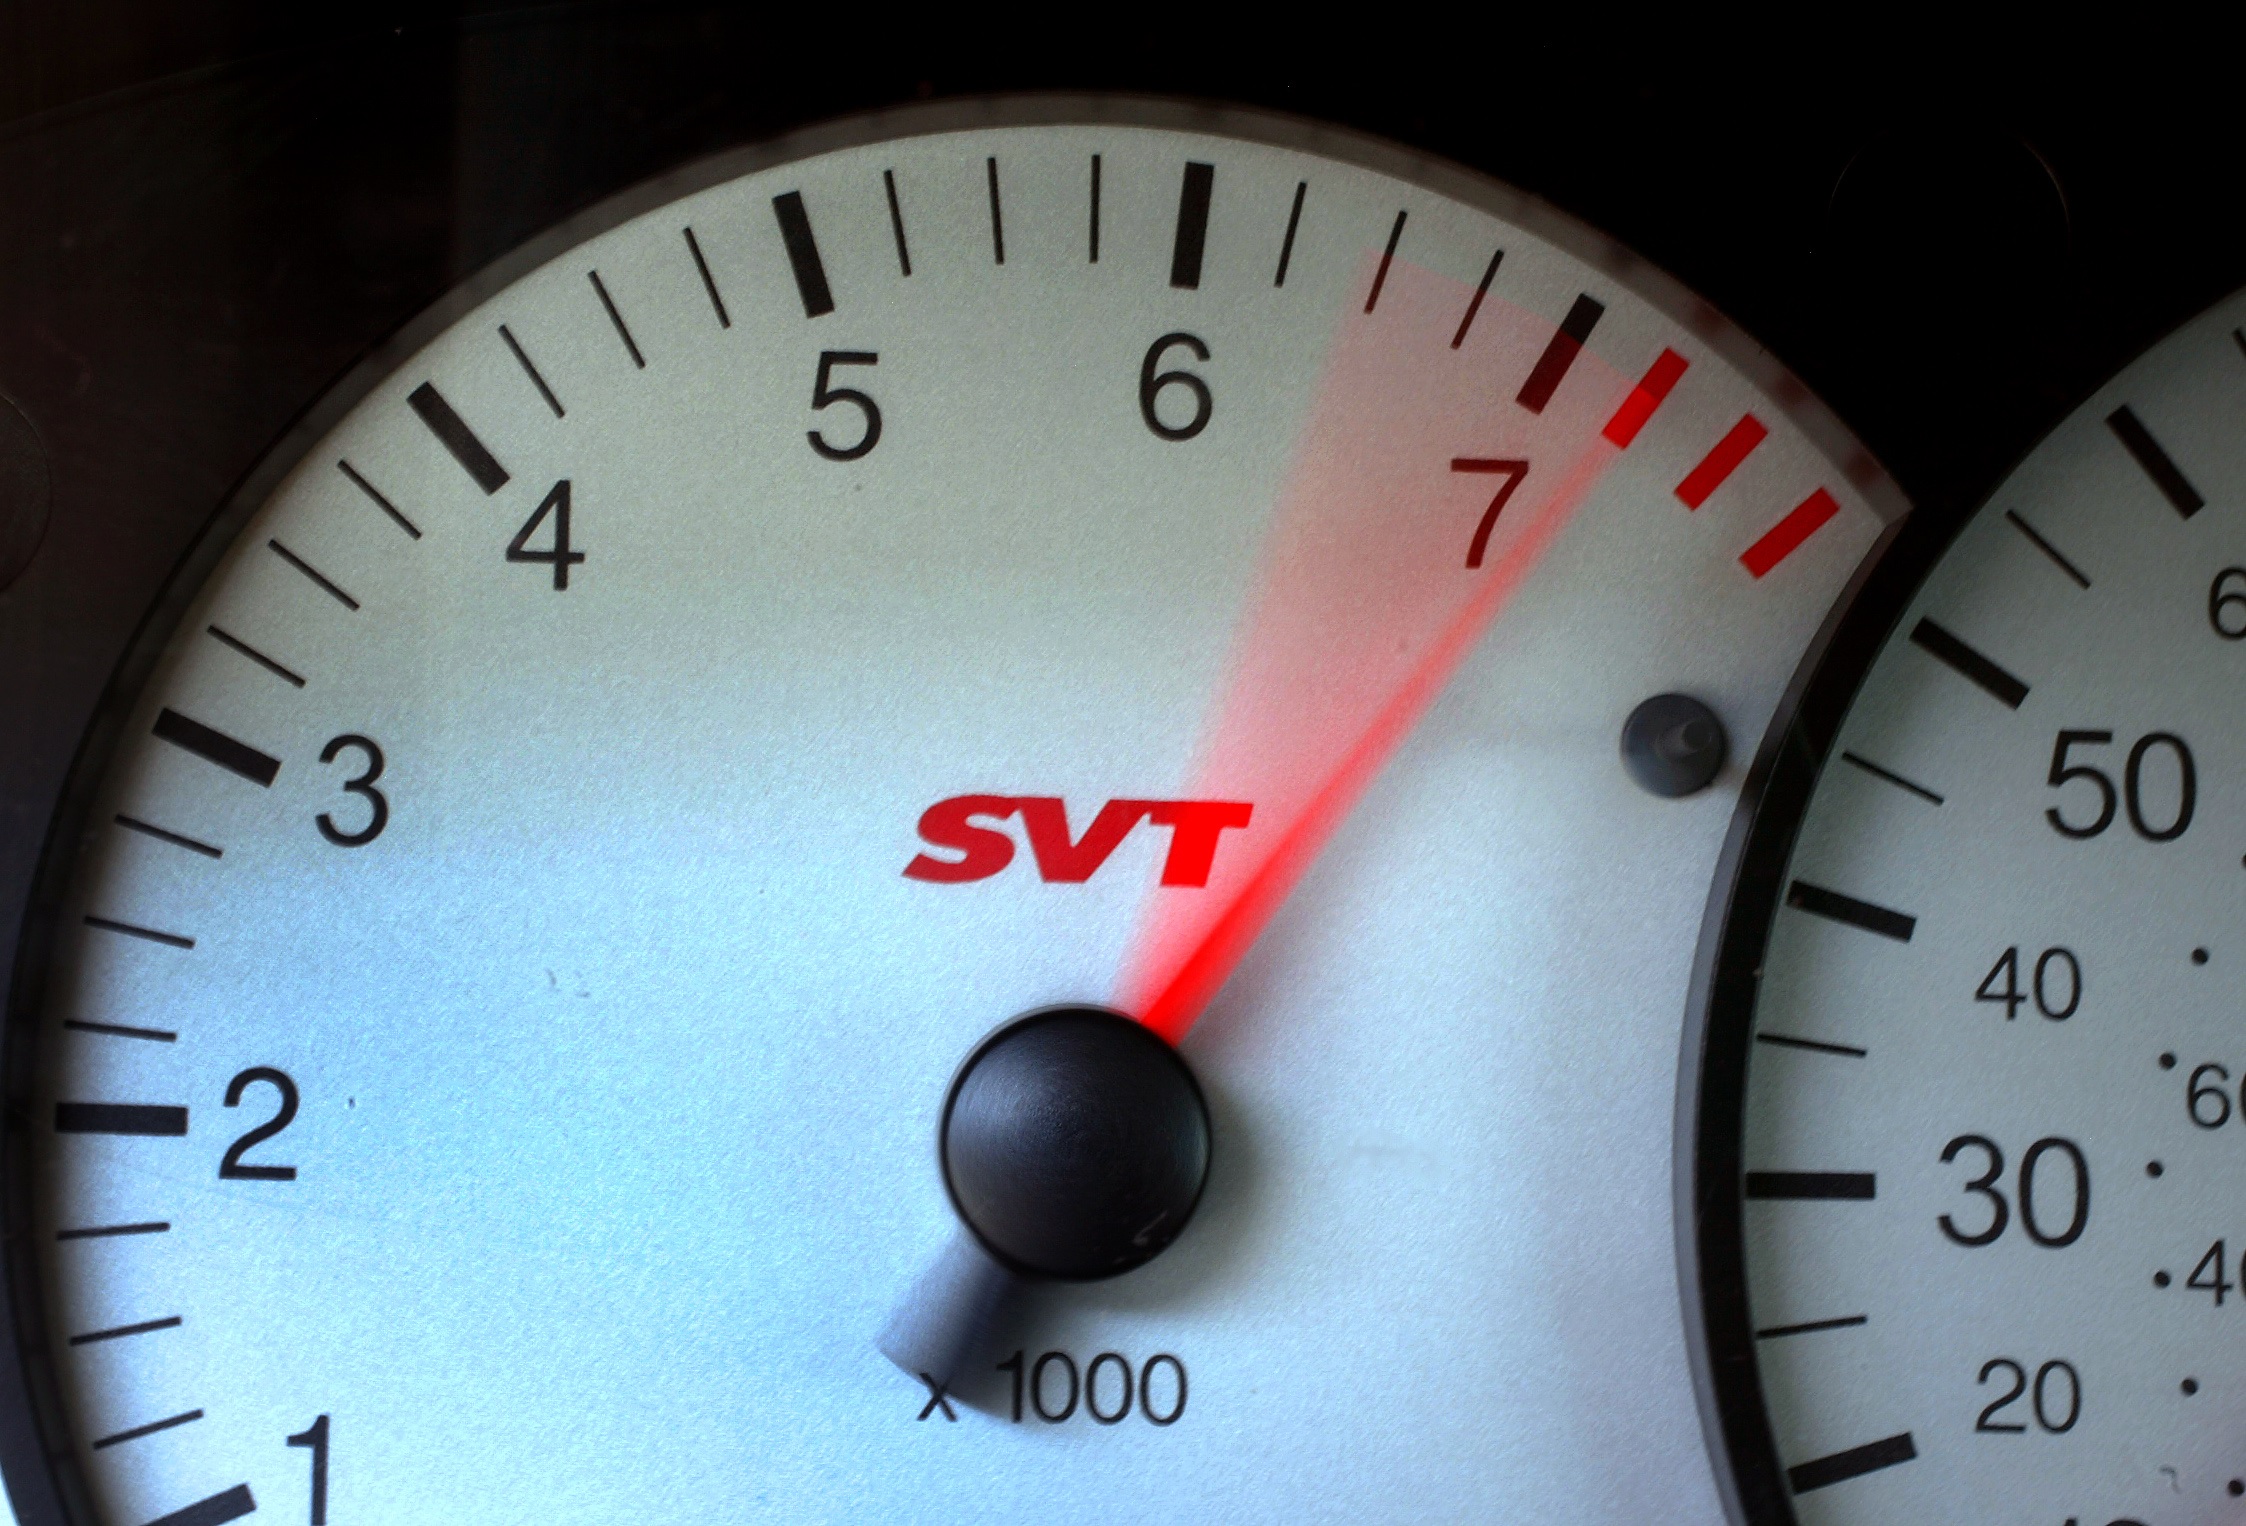 The tachometer in a Ford SVT Focus hitting the redline